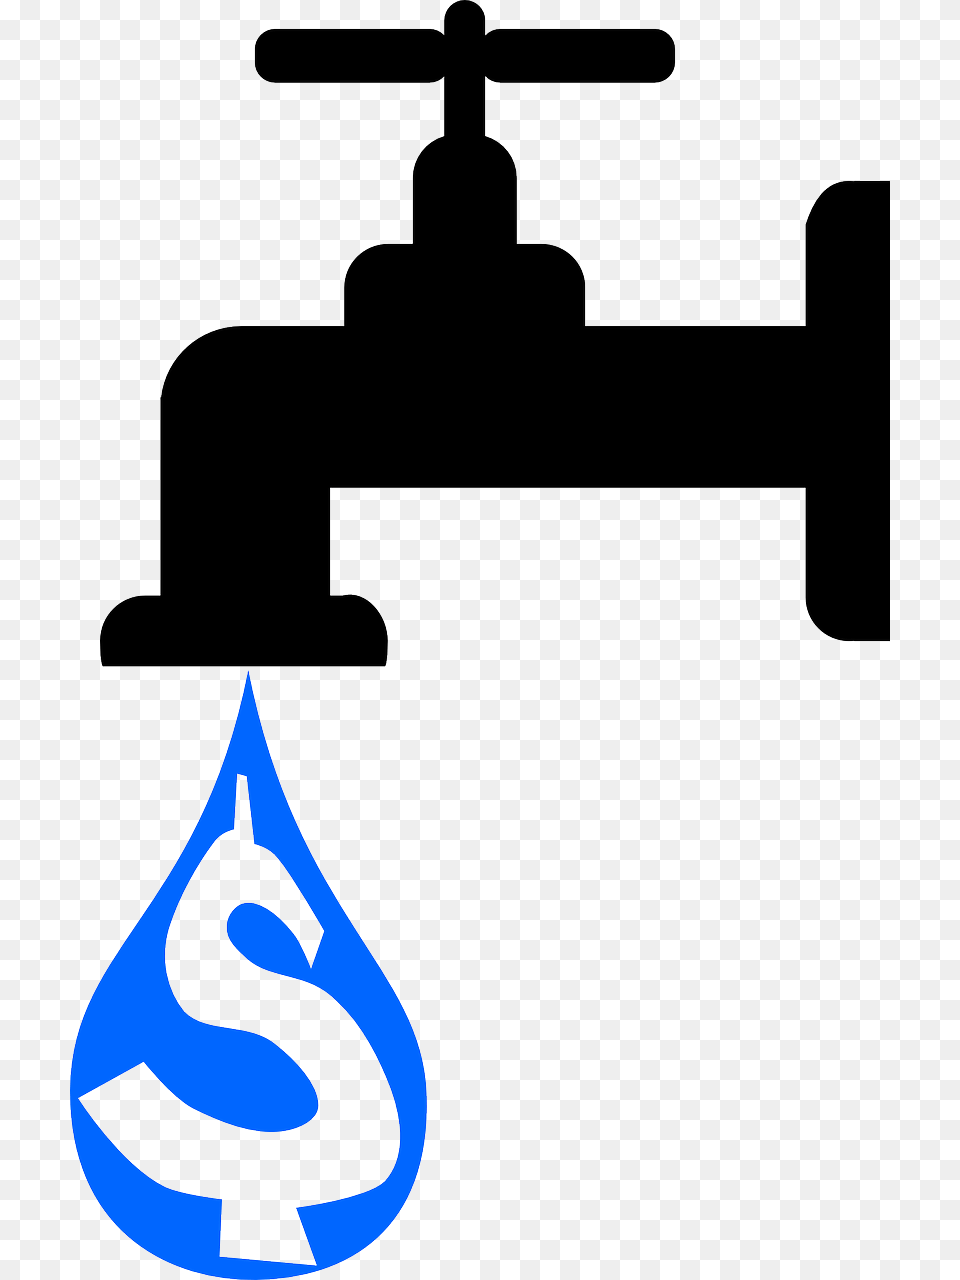 Tankless Water Heater Buying Guide, Tap, Cross, Symbol, Device Free Transparent Png